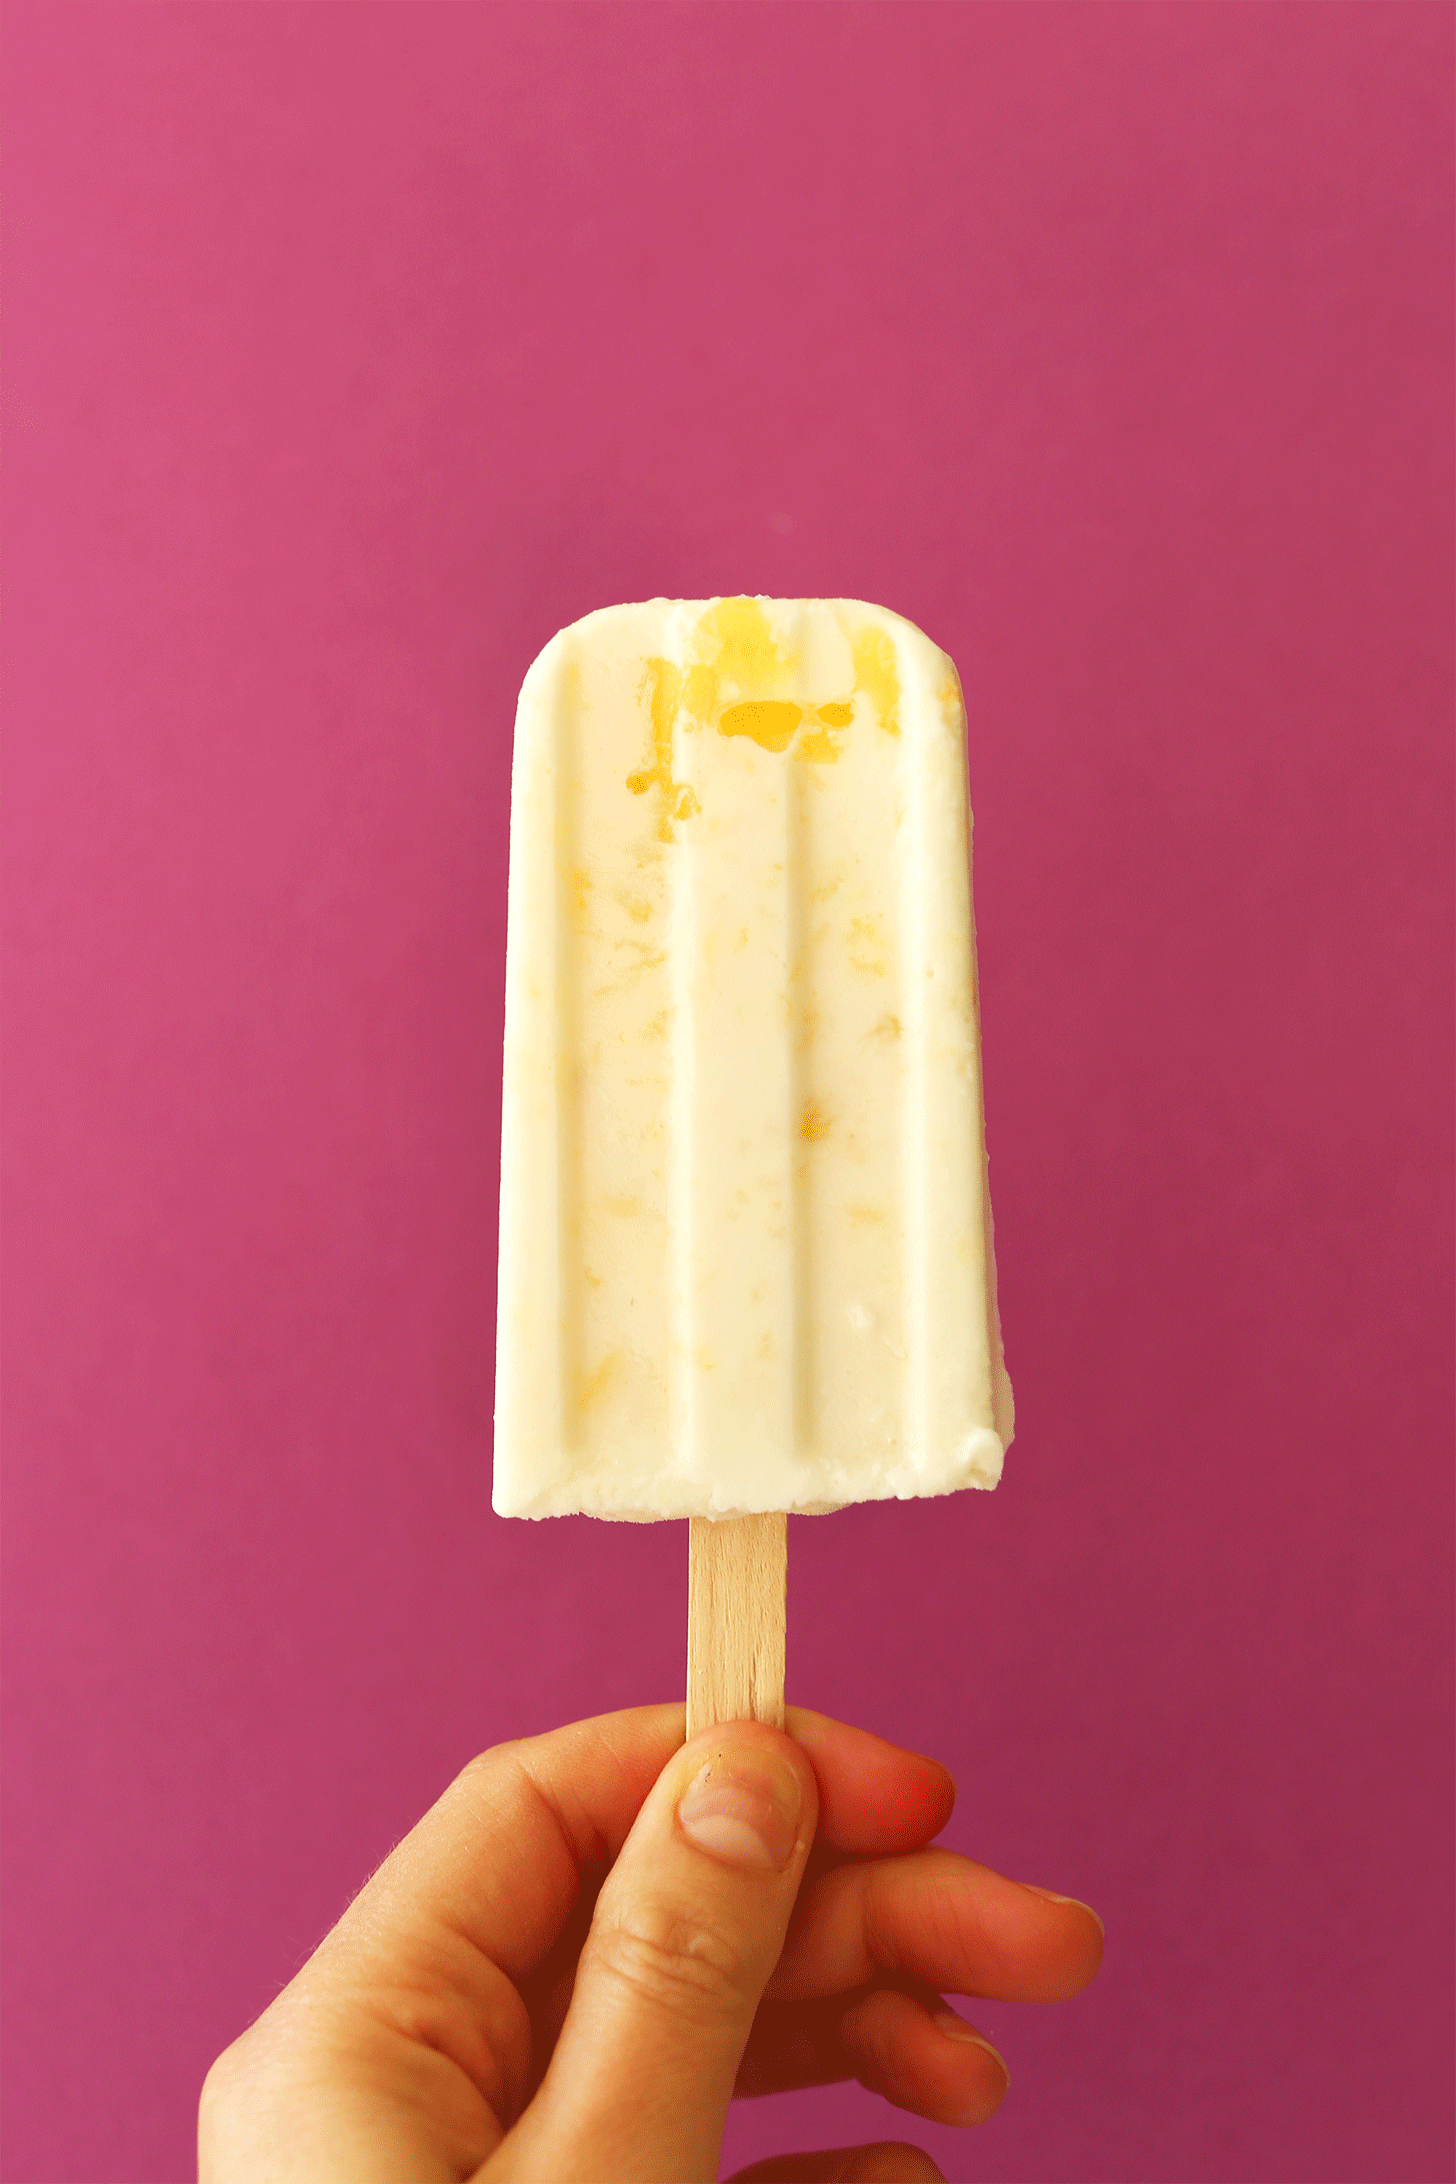 Holding a Pina Colada Popsicle against rotating color backgrounds